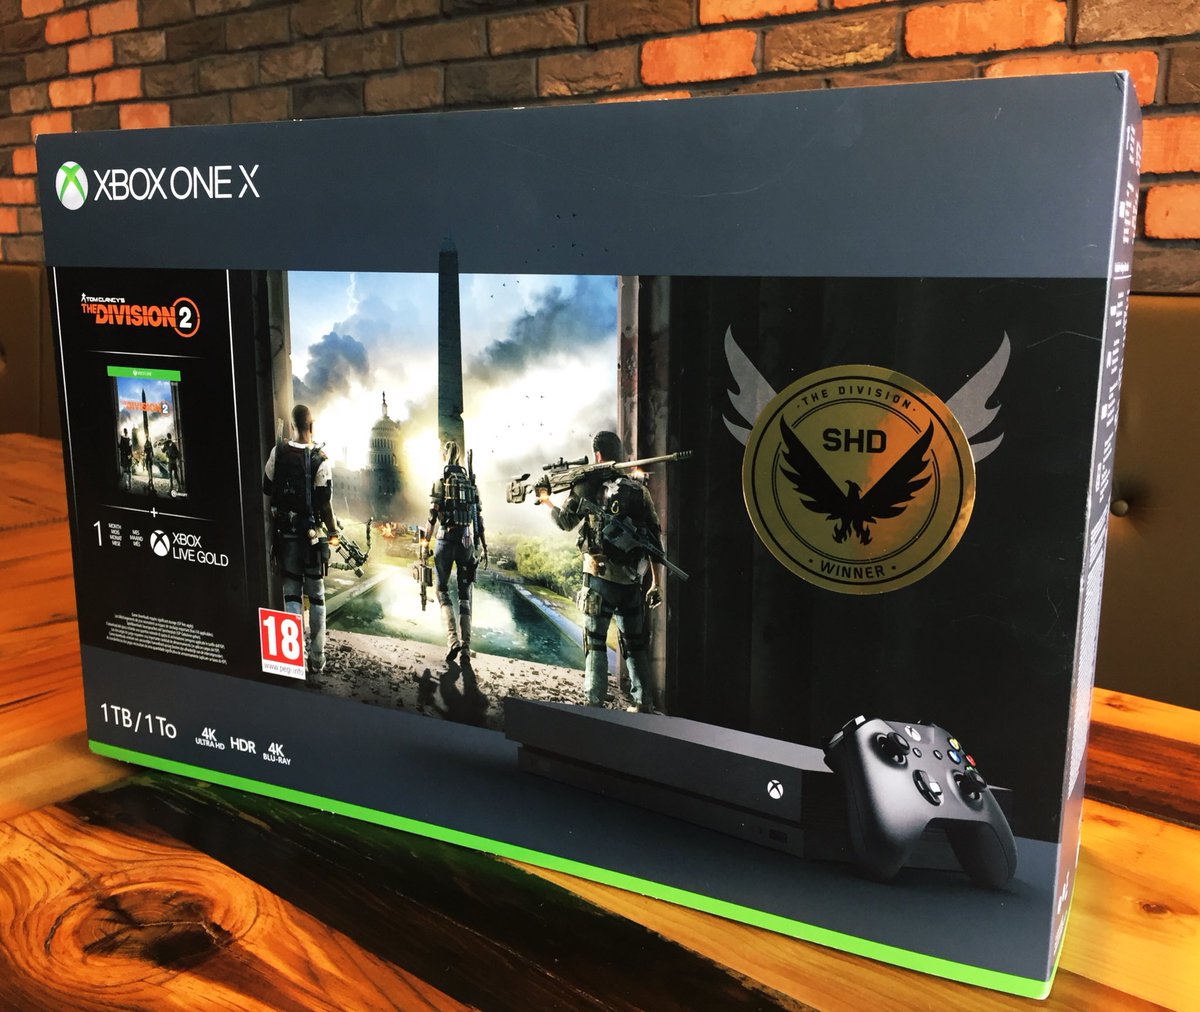 Who wants to win an Xbox One X Division 2 bundle!? 😲

All you have to do to enter is LIKE & RETWEET this tweet!👍

We will reveal our lucky winner on Friday 12th April 🗓

Good luck, agents! 

#TheDivision2